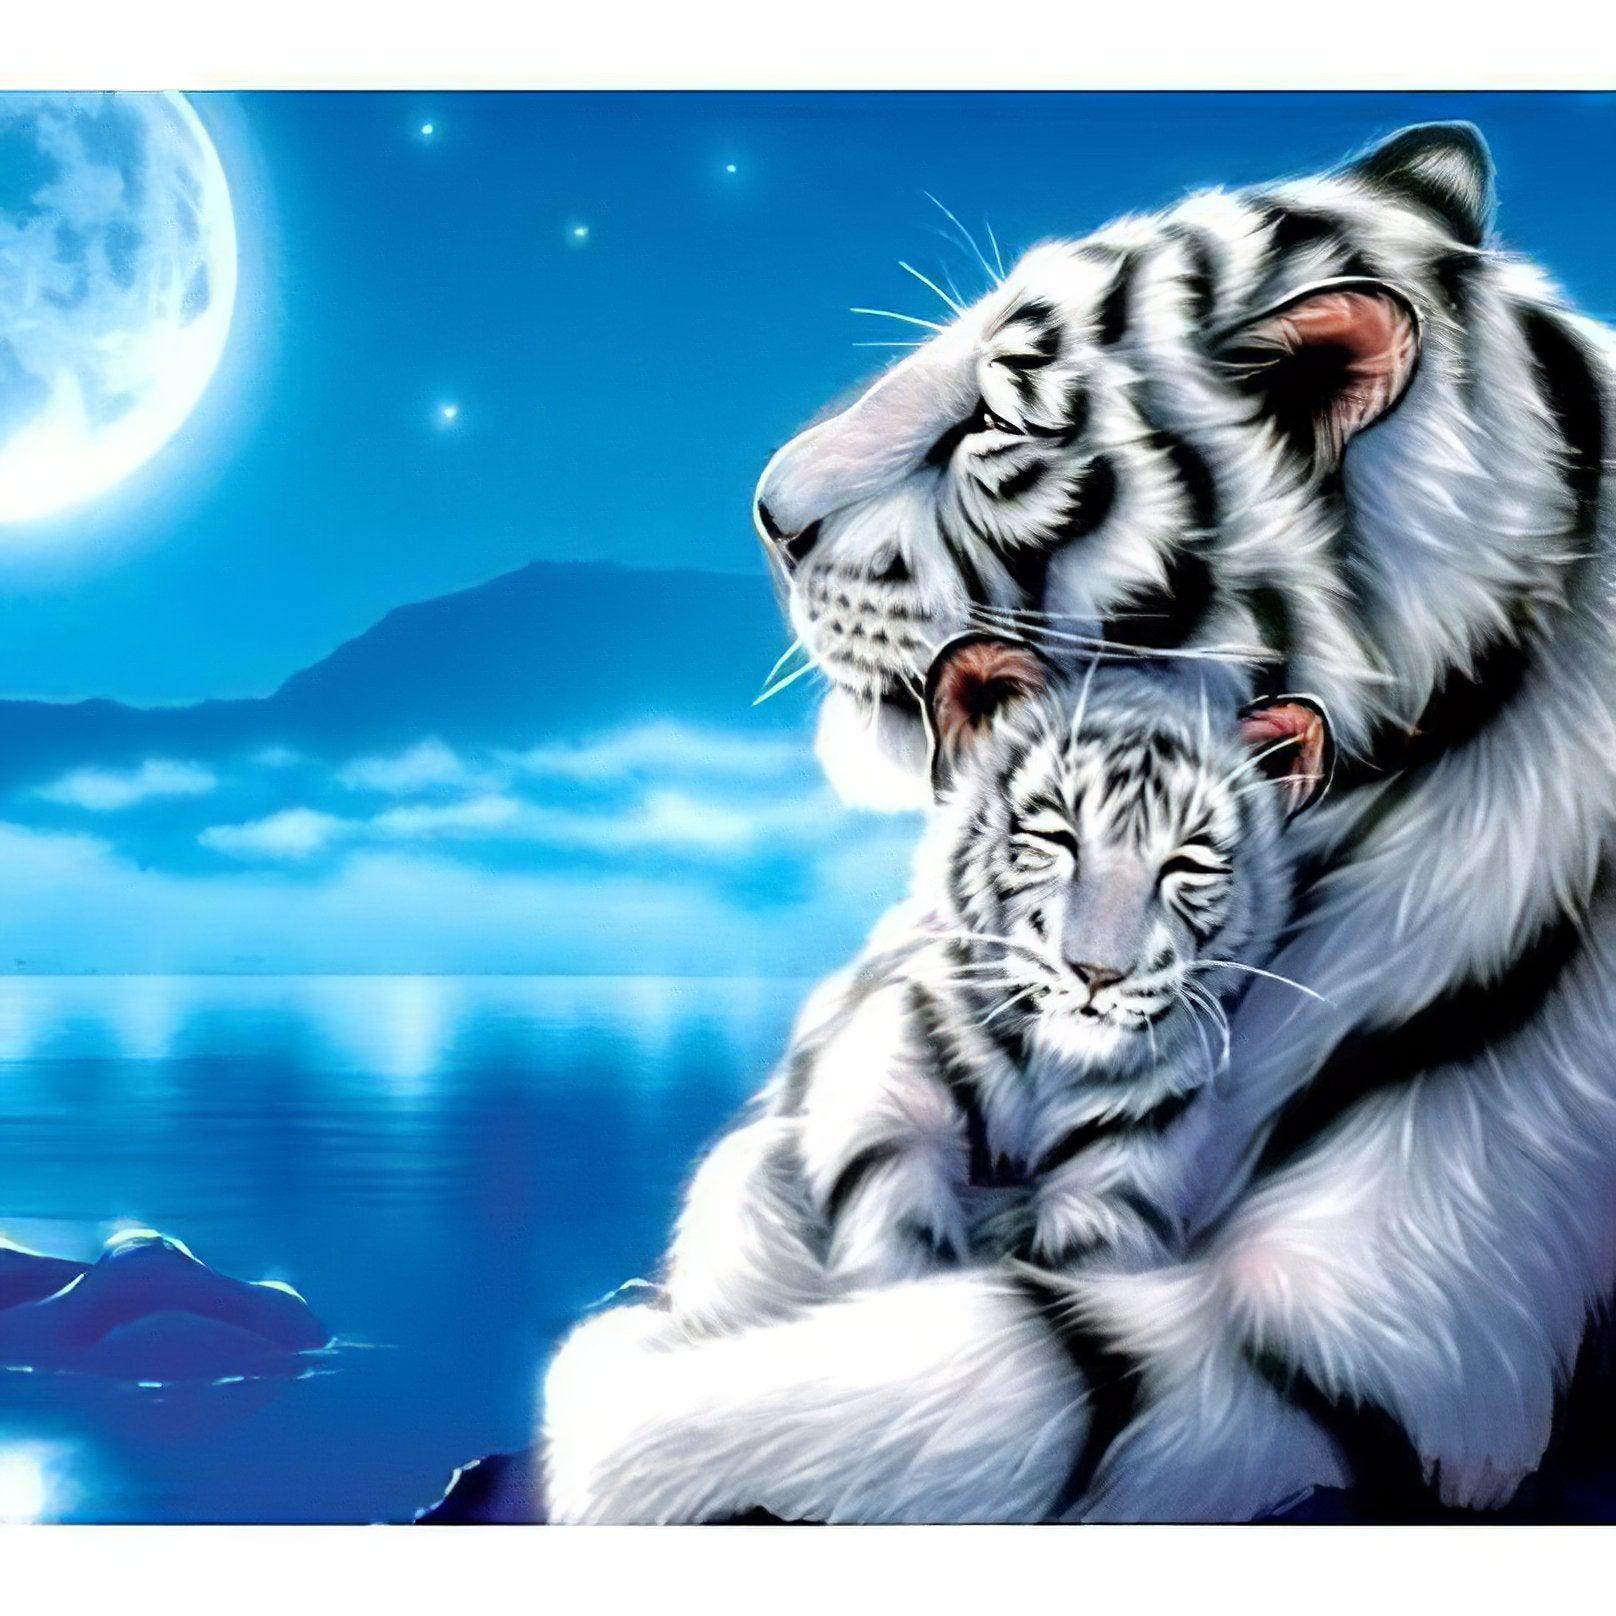 Baby White Tiger And It'S Mom: Rare beauty of maternal care Baby White Tiger And It'S Mom - Diamondartlove